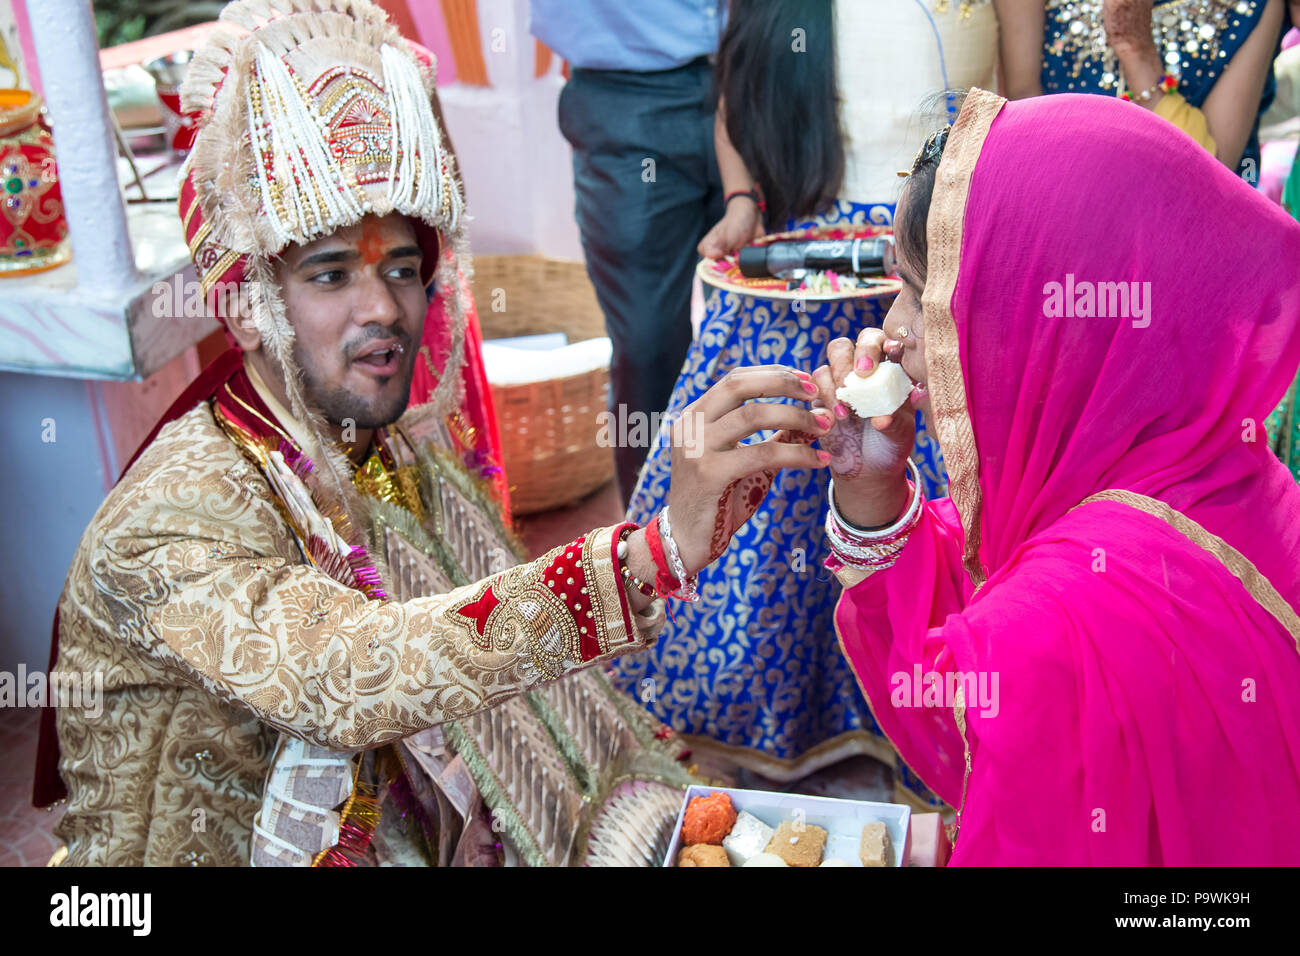 A traditional wedding in the Indian province.The groom accepts gifts,wishes and blessings from his family. India June 2018 Stock Photo